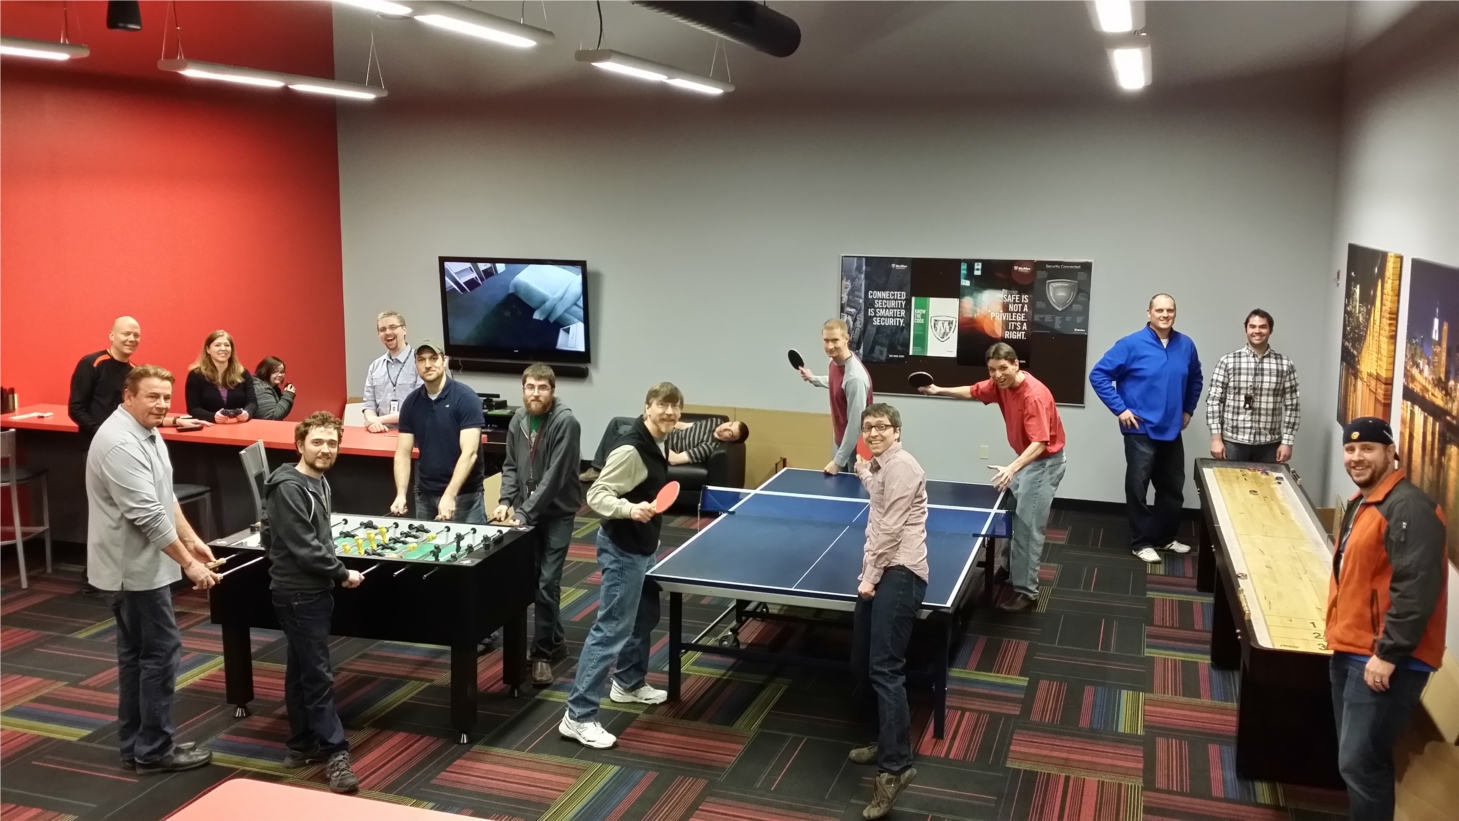 Team building in our game room!